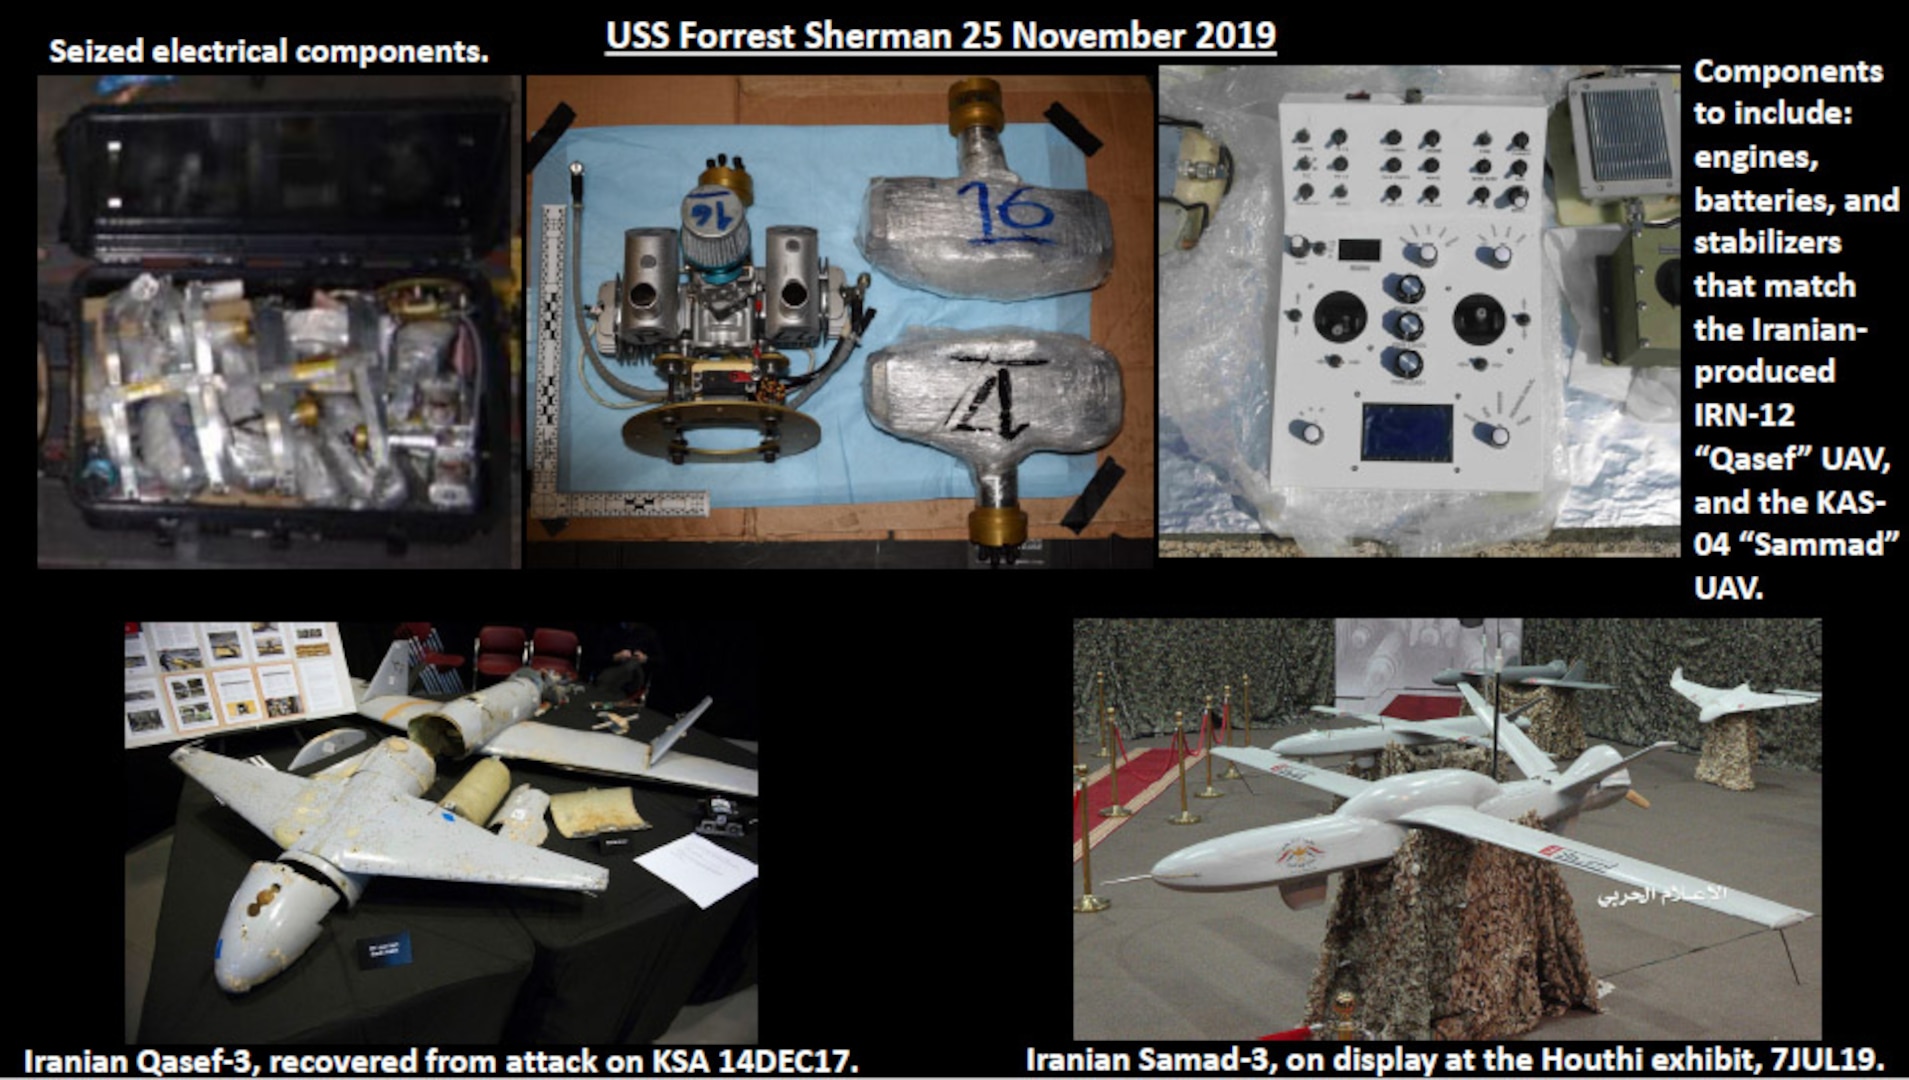 The shipment interdicted by the USS FORREST SHERMAN in November included several unmanned-aerial system components--including engines and related parts, as well as servos used to move control surfaces and to regulate the throttle.